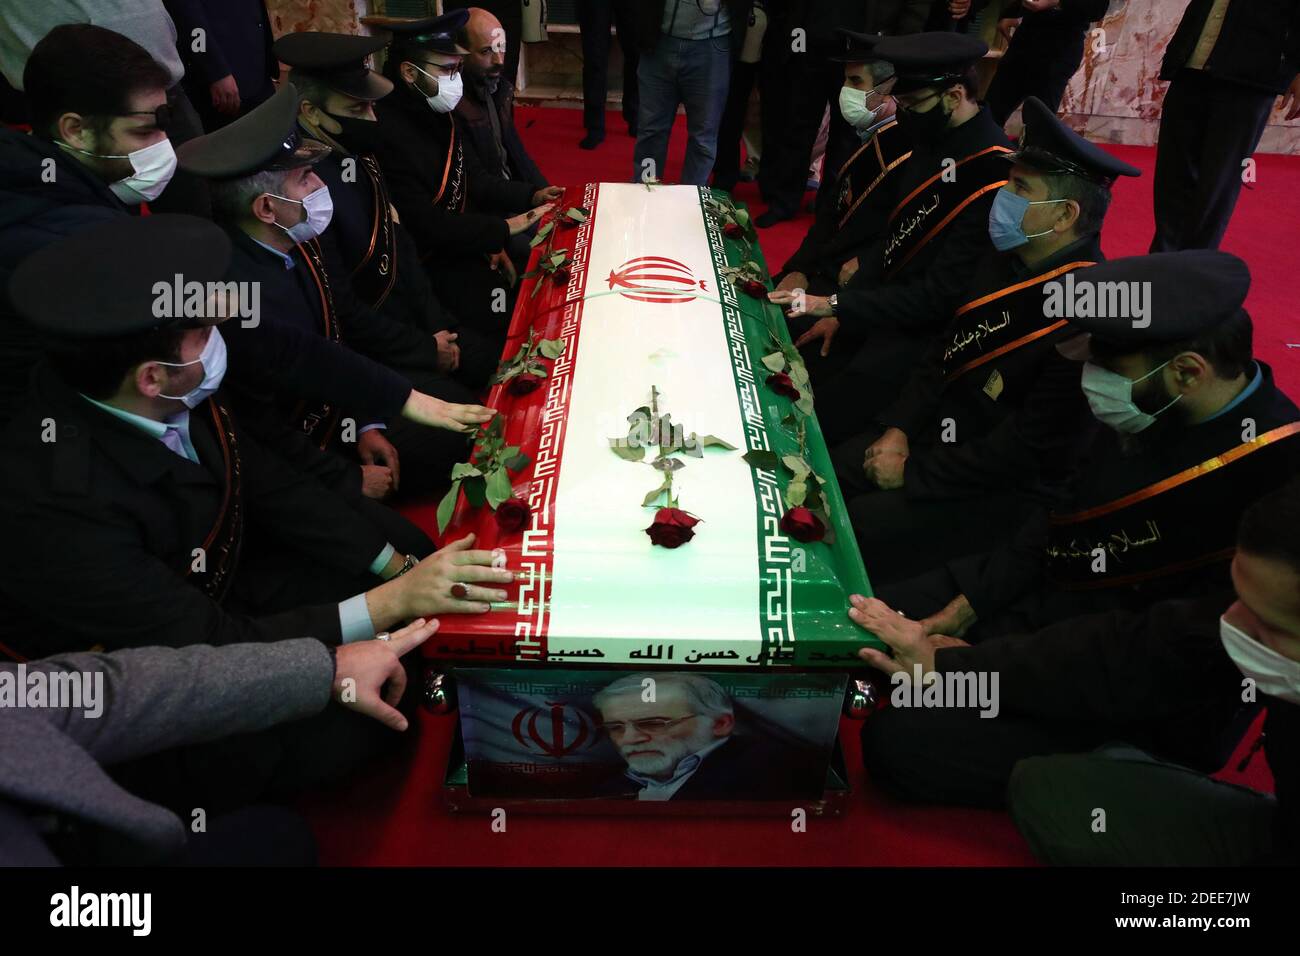 Tehran, Iran. 30th Nov, 2020. A handout photo made available by the Iranian defense ministry office shows soldiers praying next to the coffin of slain Iranian nuclear scientist Mohsen Fakhrizadeh during funeral procession inside the Iranian defense ministry in Tehran, Iran, Monday, November 30. 2020. Iranian officials have blamed Israel for the killing of Fakhrizadeh who led Tehran's disbanded military nuclear program. Photo by Iranian Defense Ministry/UPI Credit: UPI/Alamy Live News Stock Photo